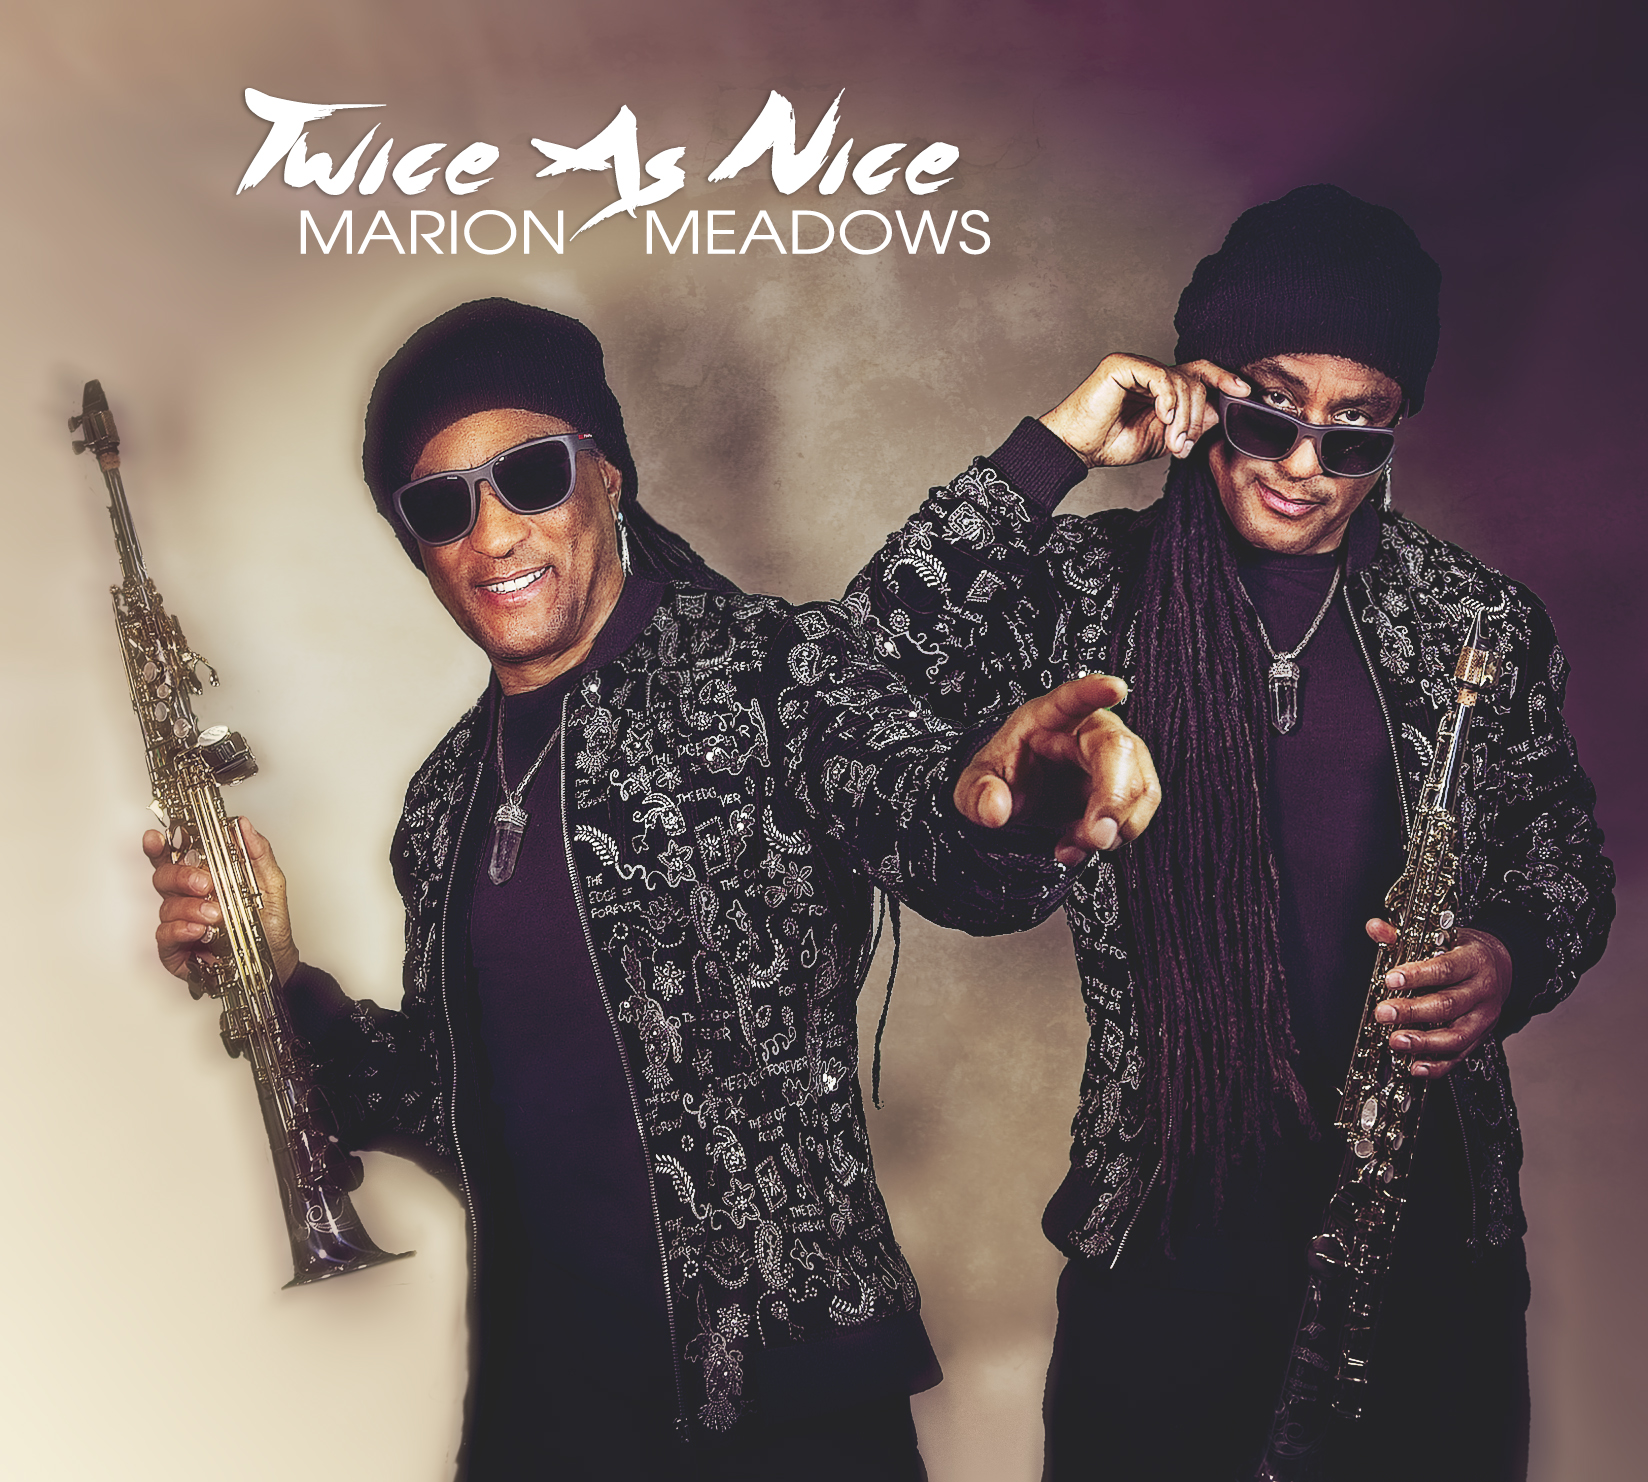 Art for Twice As Nice by Marion Meadows